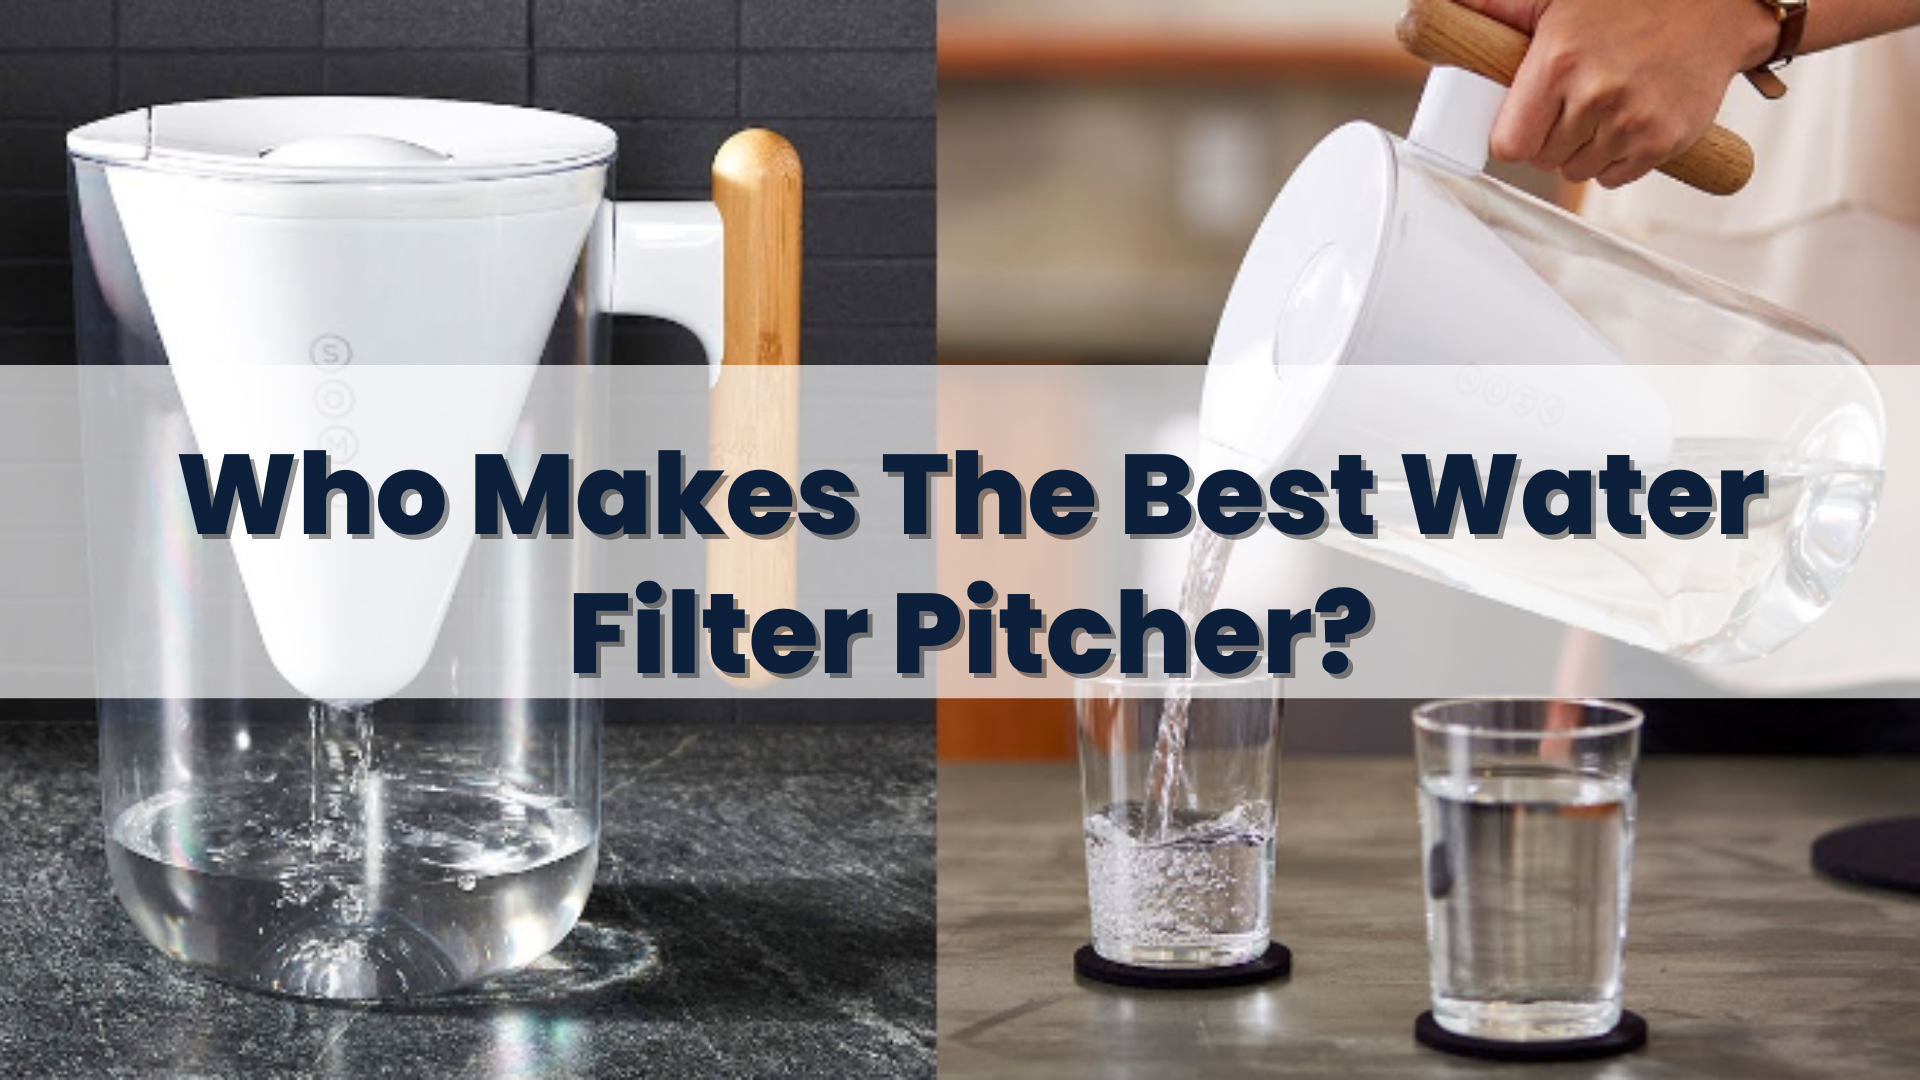 Who Makes The Best Water Filter Pitcher